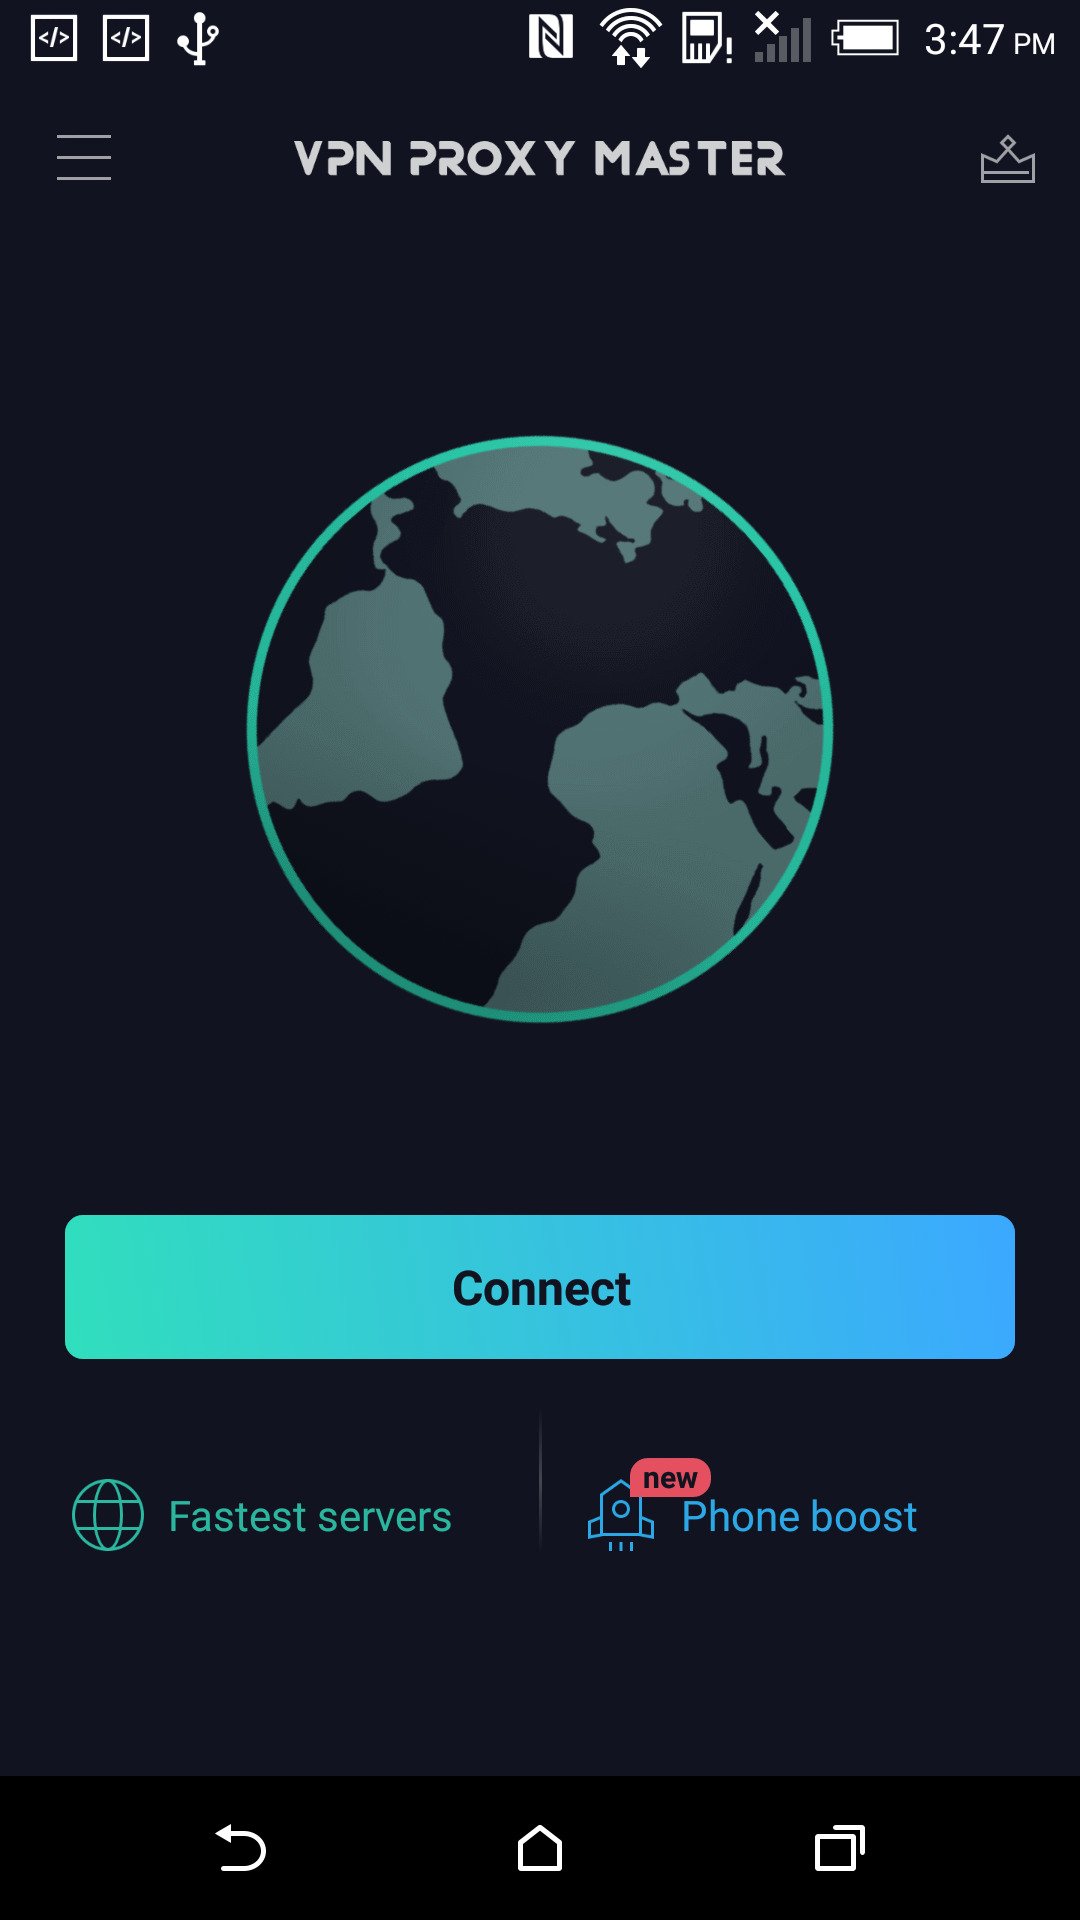 VPN Proxy Master 2.2.2 APK for Android - Download - AndroidAPKsFree